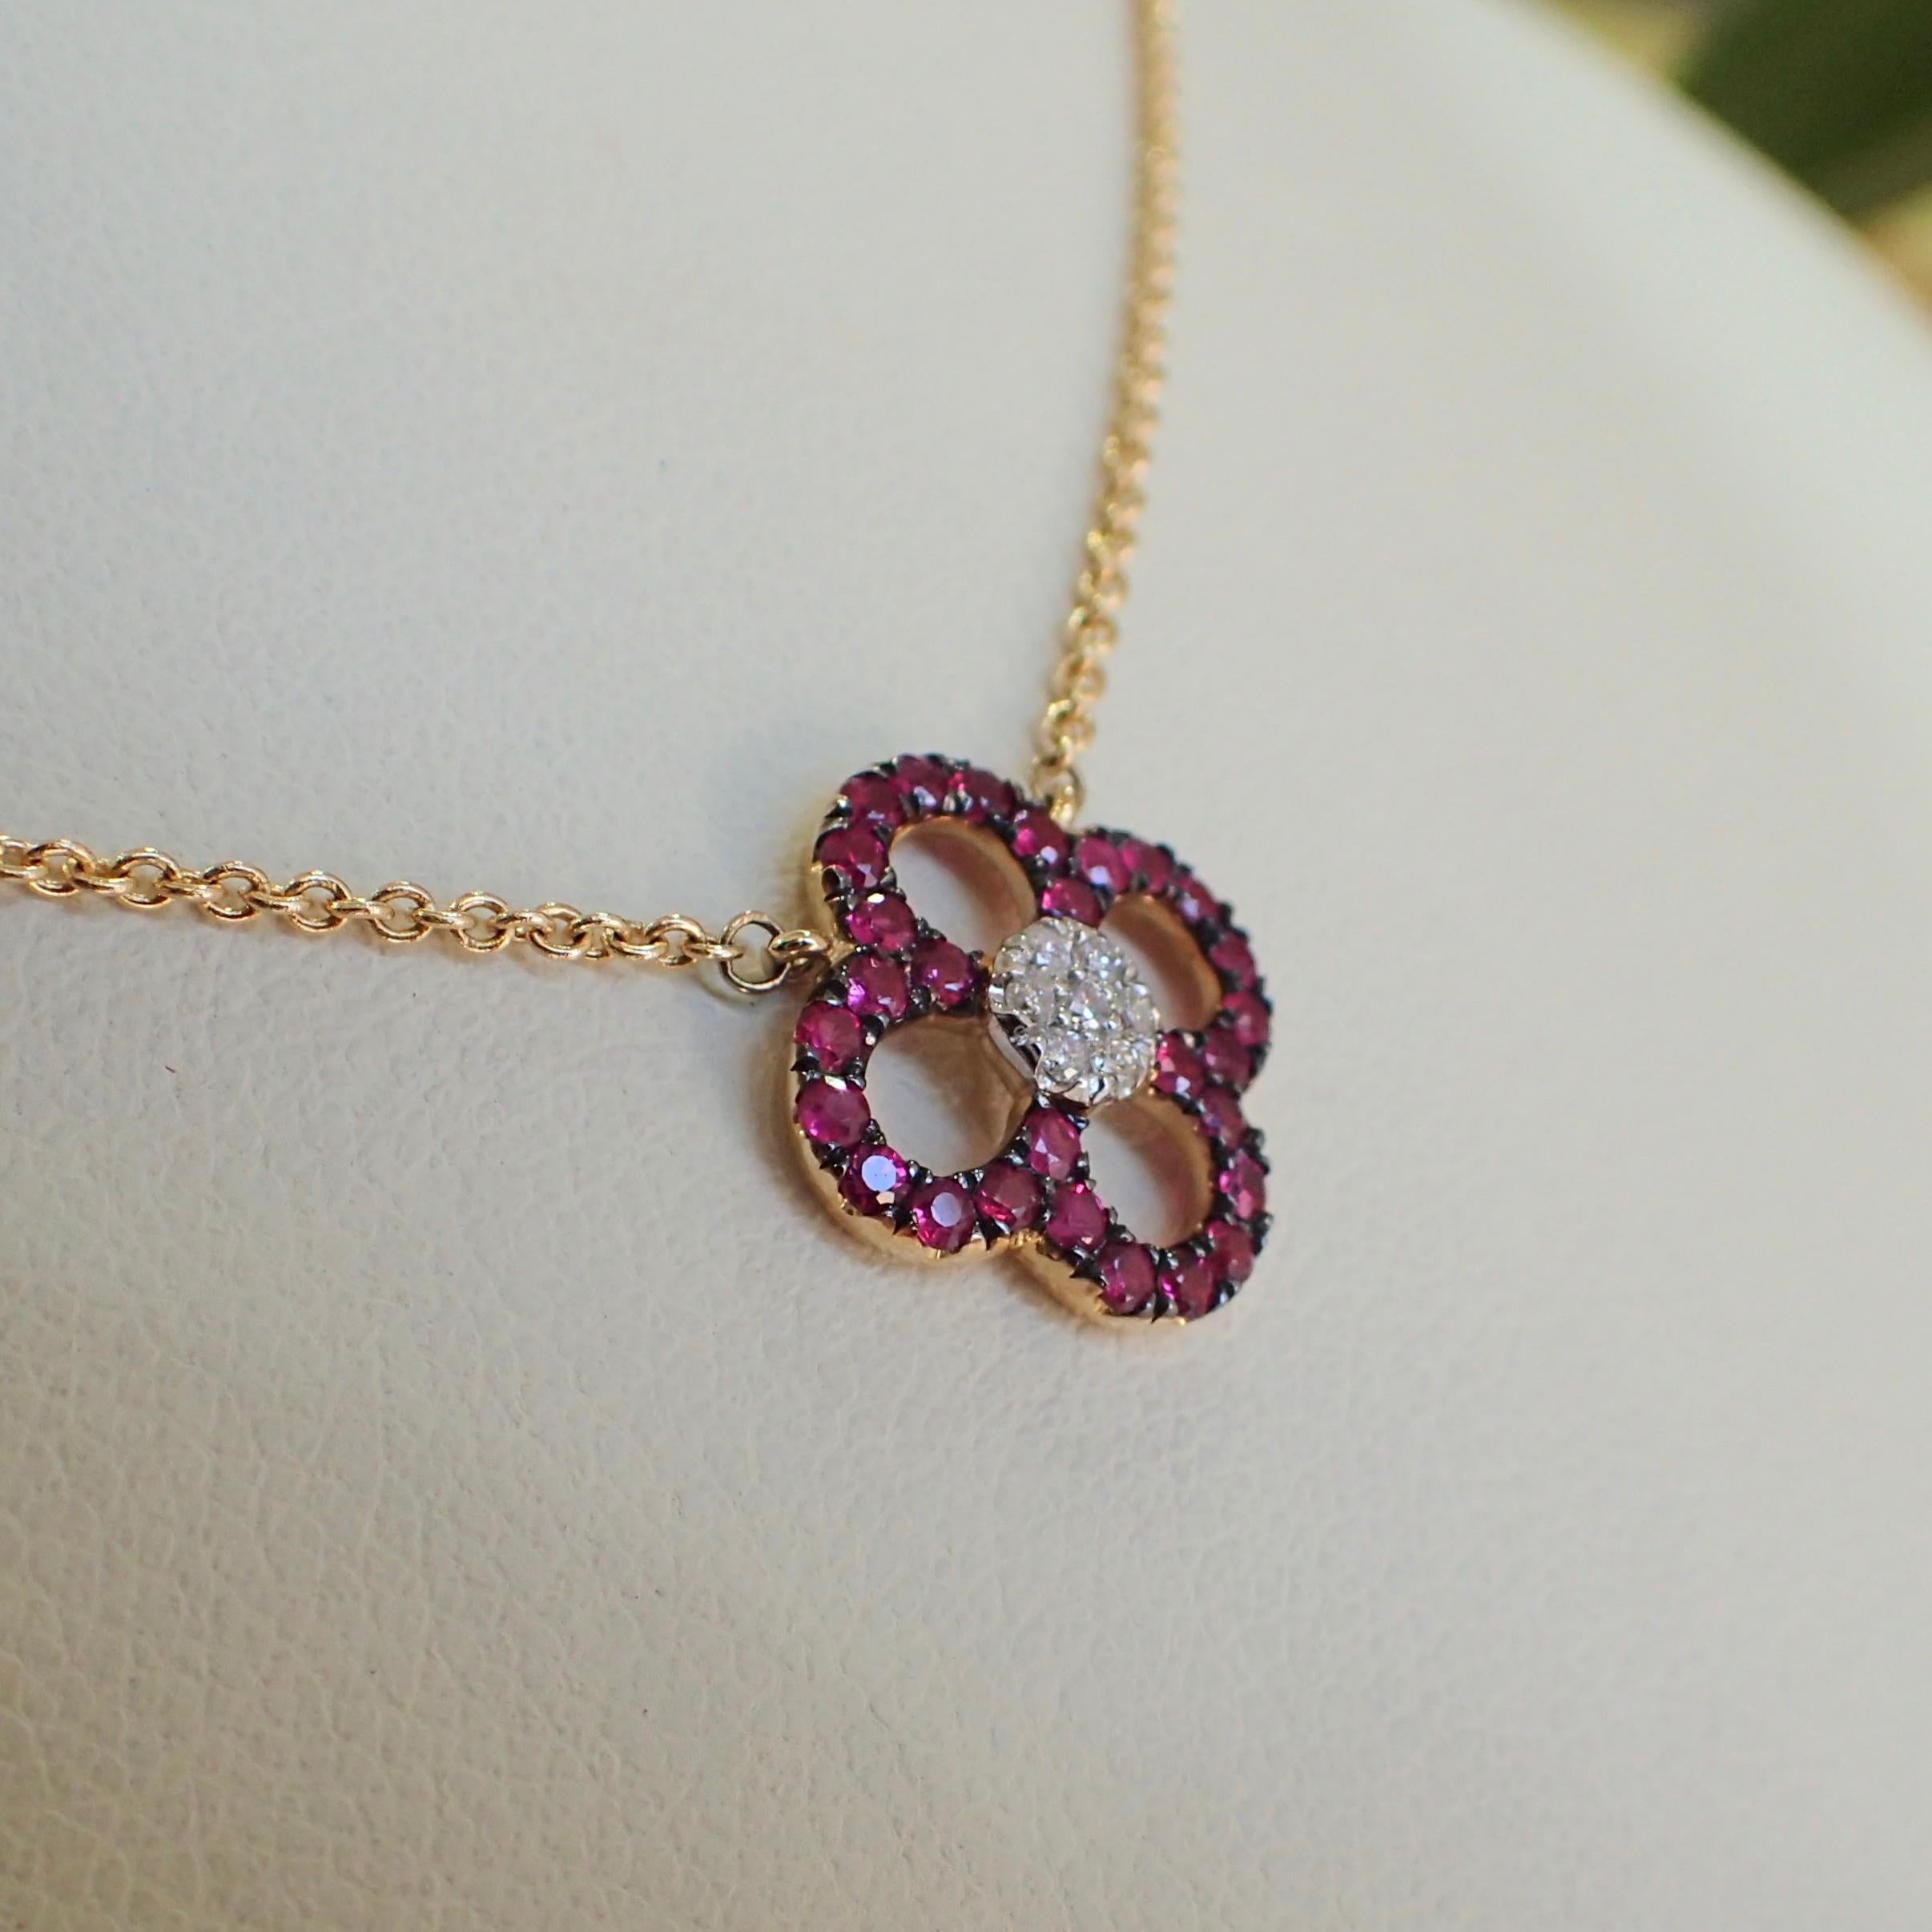 Round Cut 14 Karat Yellow Gold Ruby and Diamond Flower Pendant Hangs from Cable Chain